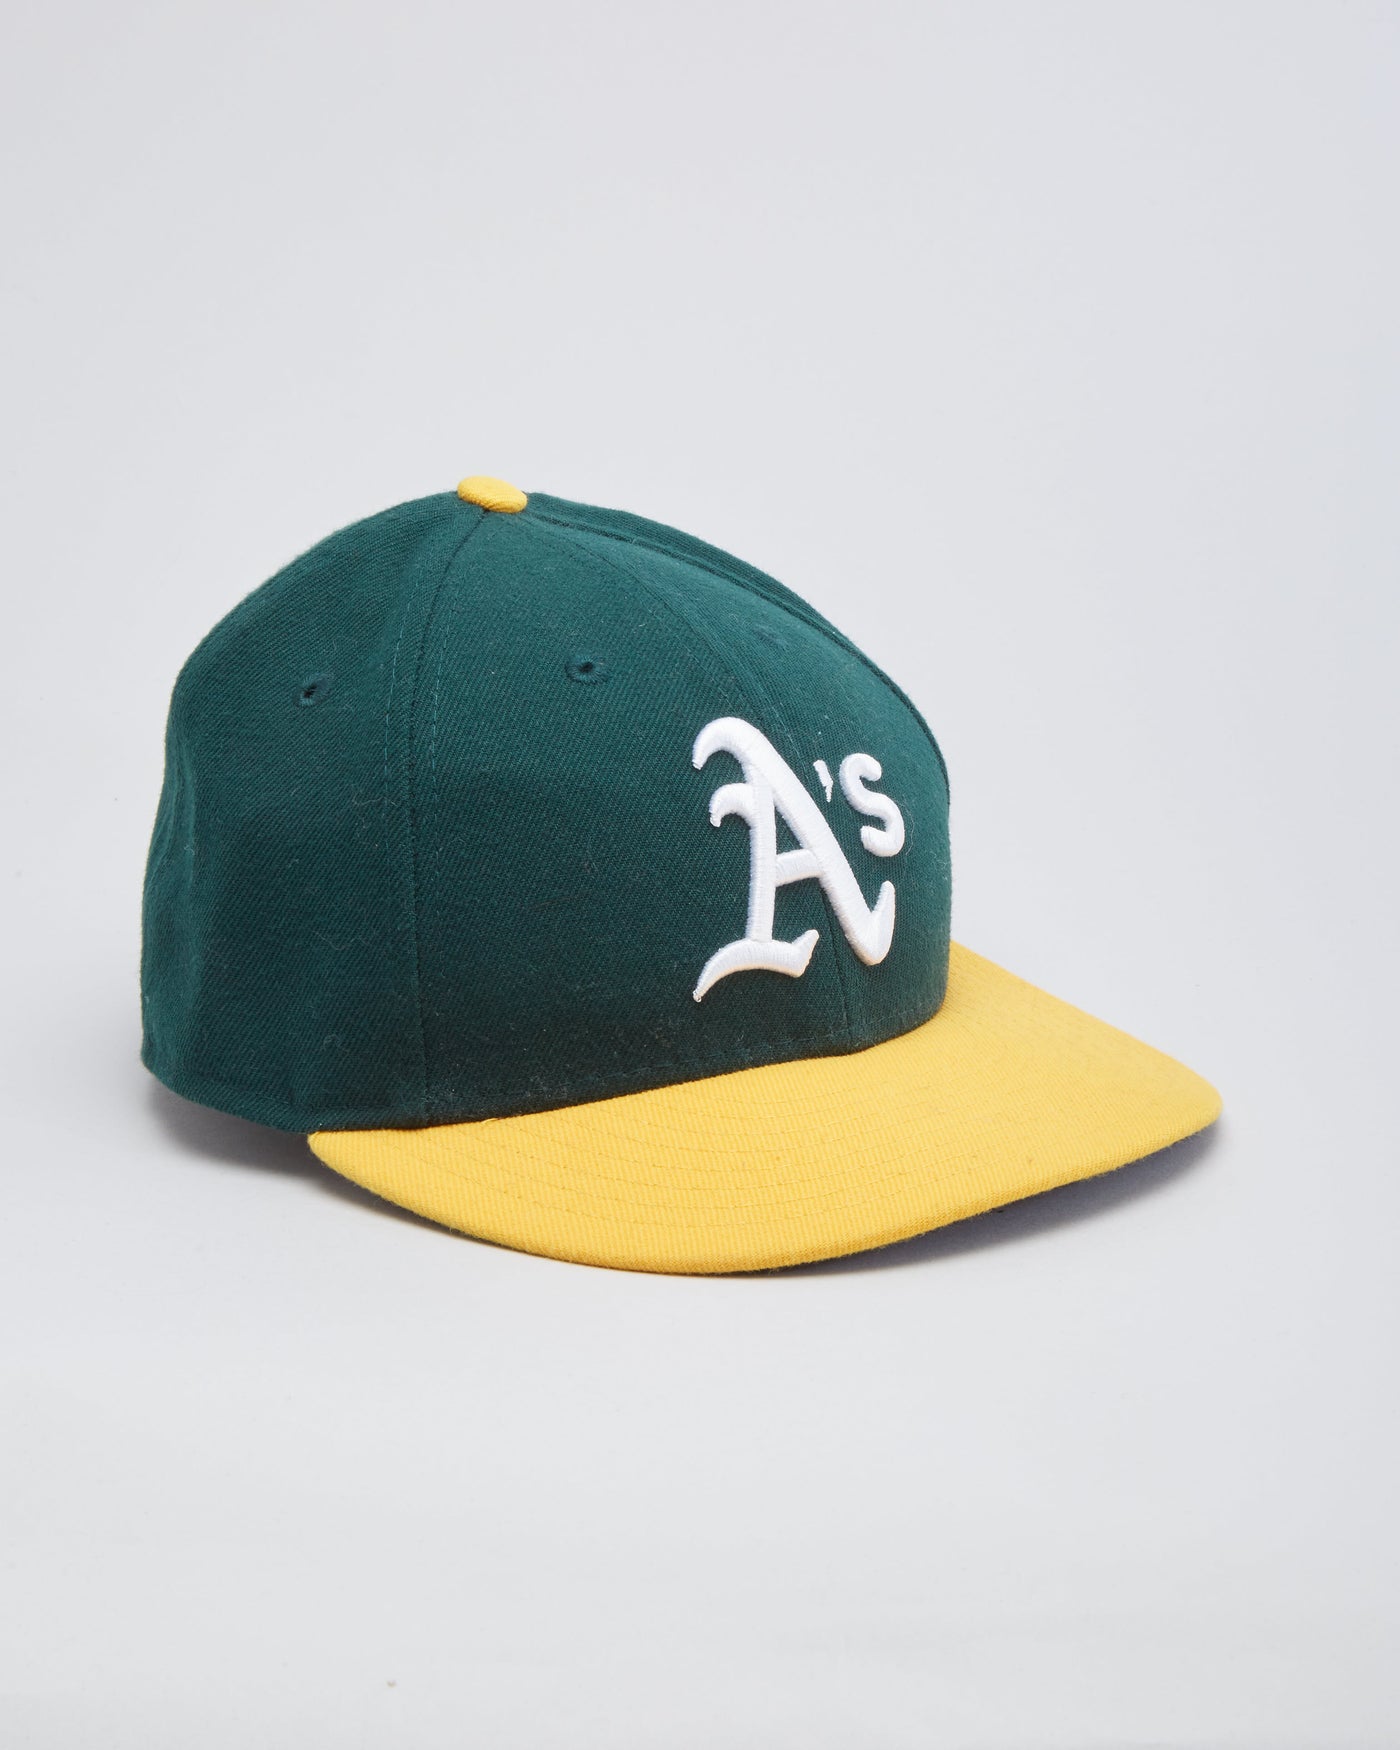 Oakland A's New Era Green Fitted Cap / Hat - 7 1/8